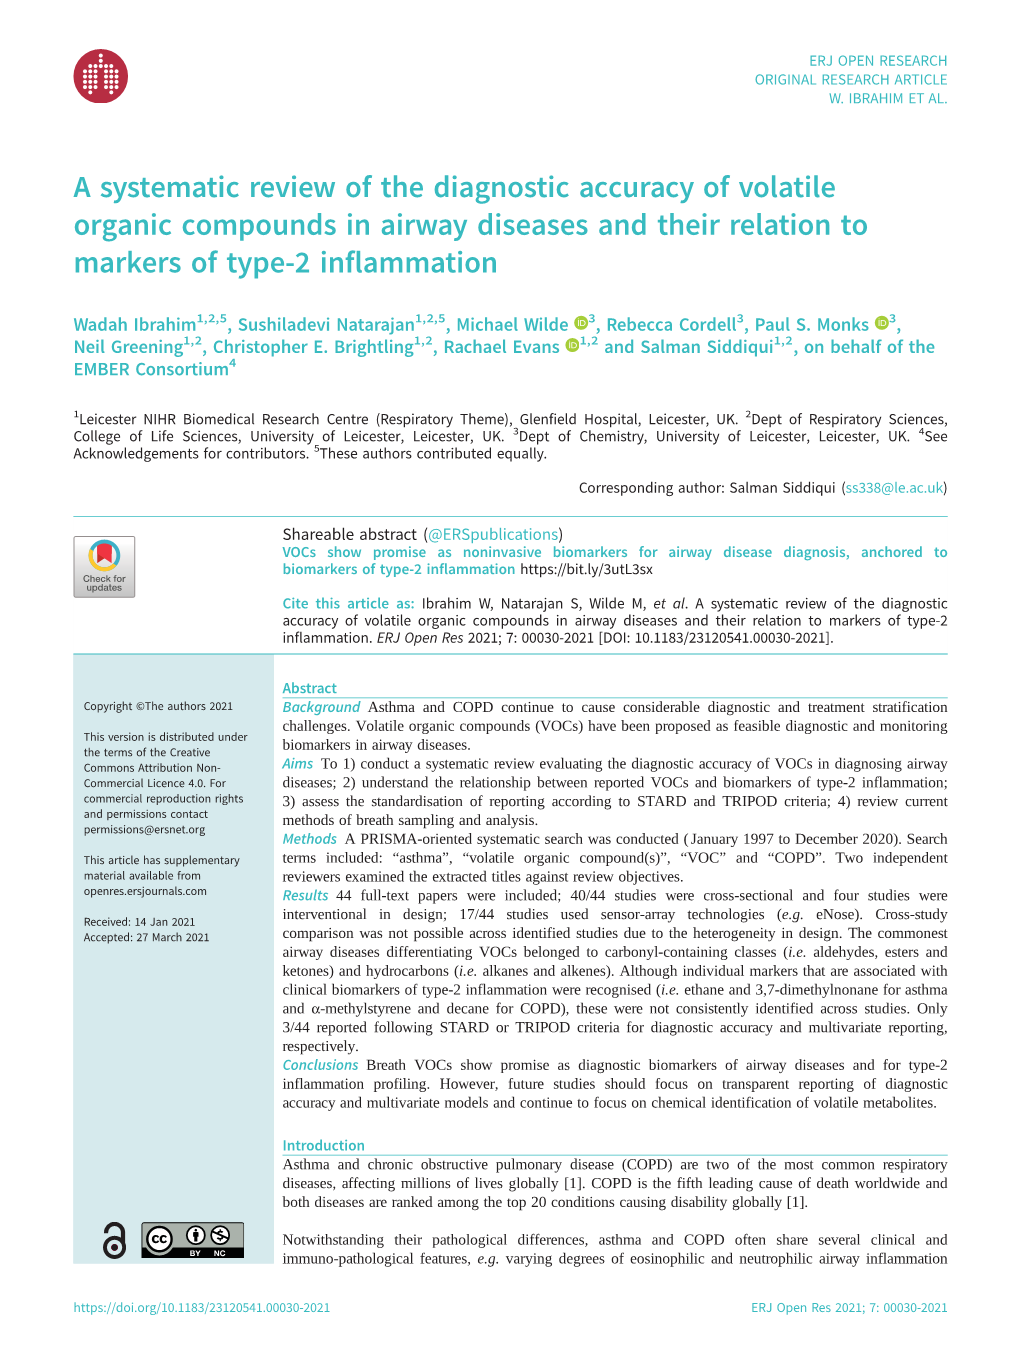 A Systematic Review of the Diagnostic Accuracy of Volatile Organic Compounds in Airway Diseases and Their Relation to Markers of Type-2 Inflammation